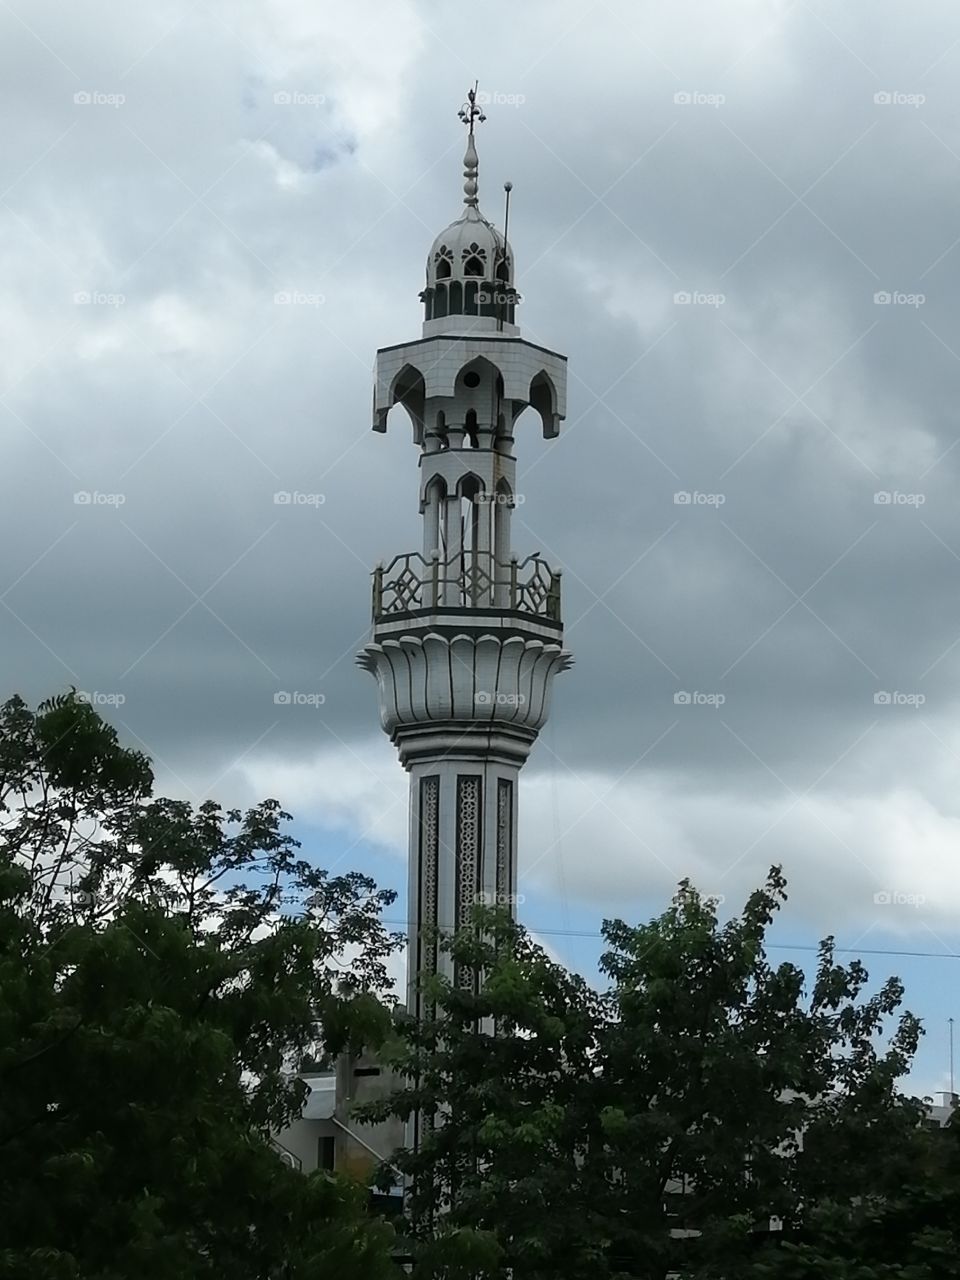 Let's get abstract. Mosque minar in front of the clouds.